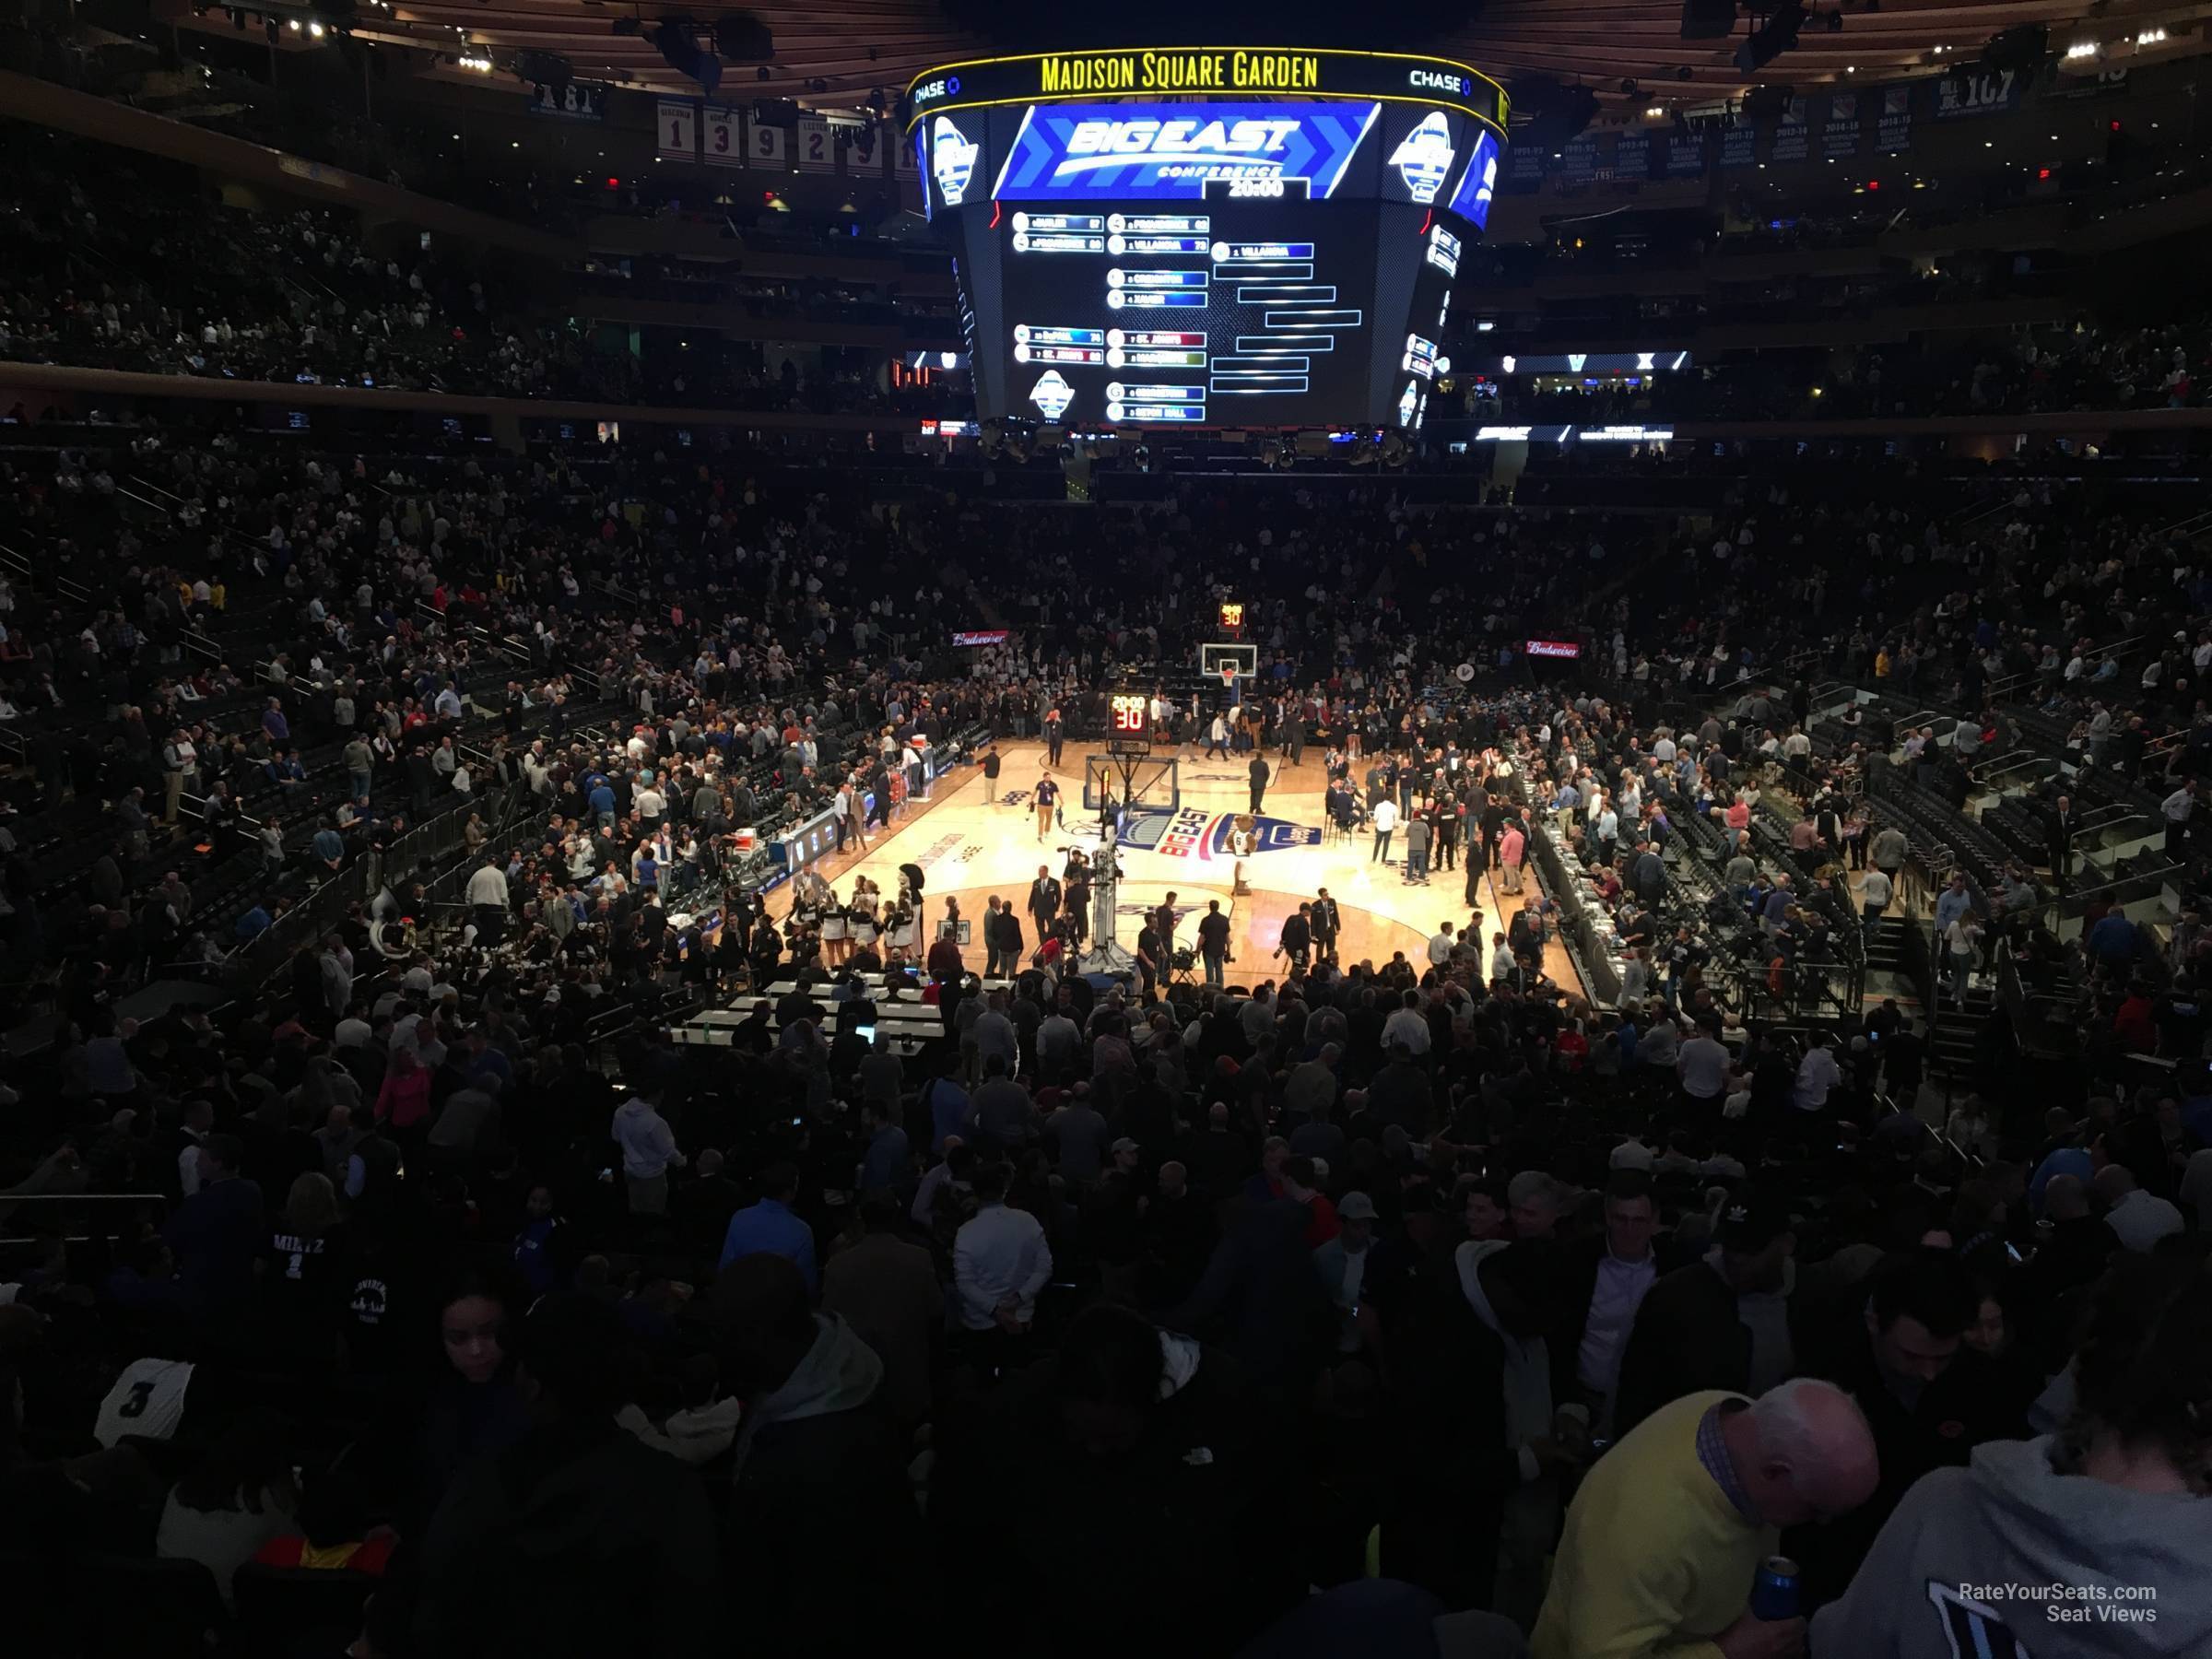 madison club 63, row 1 seat view  for basketball - madison square garden